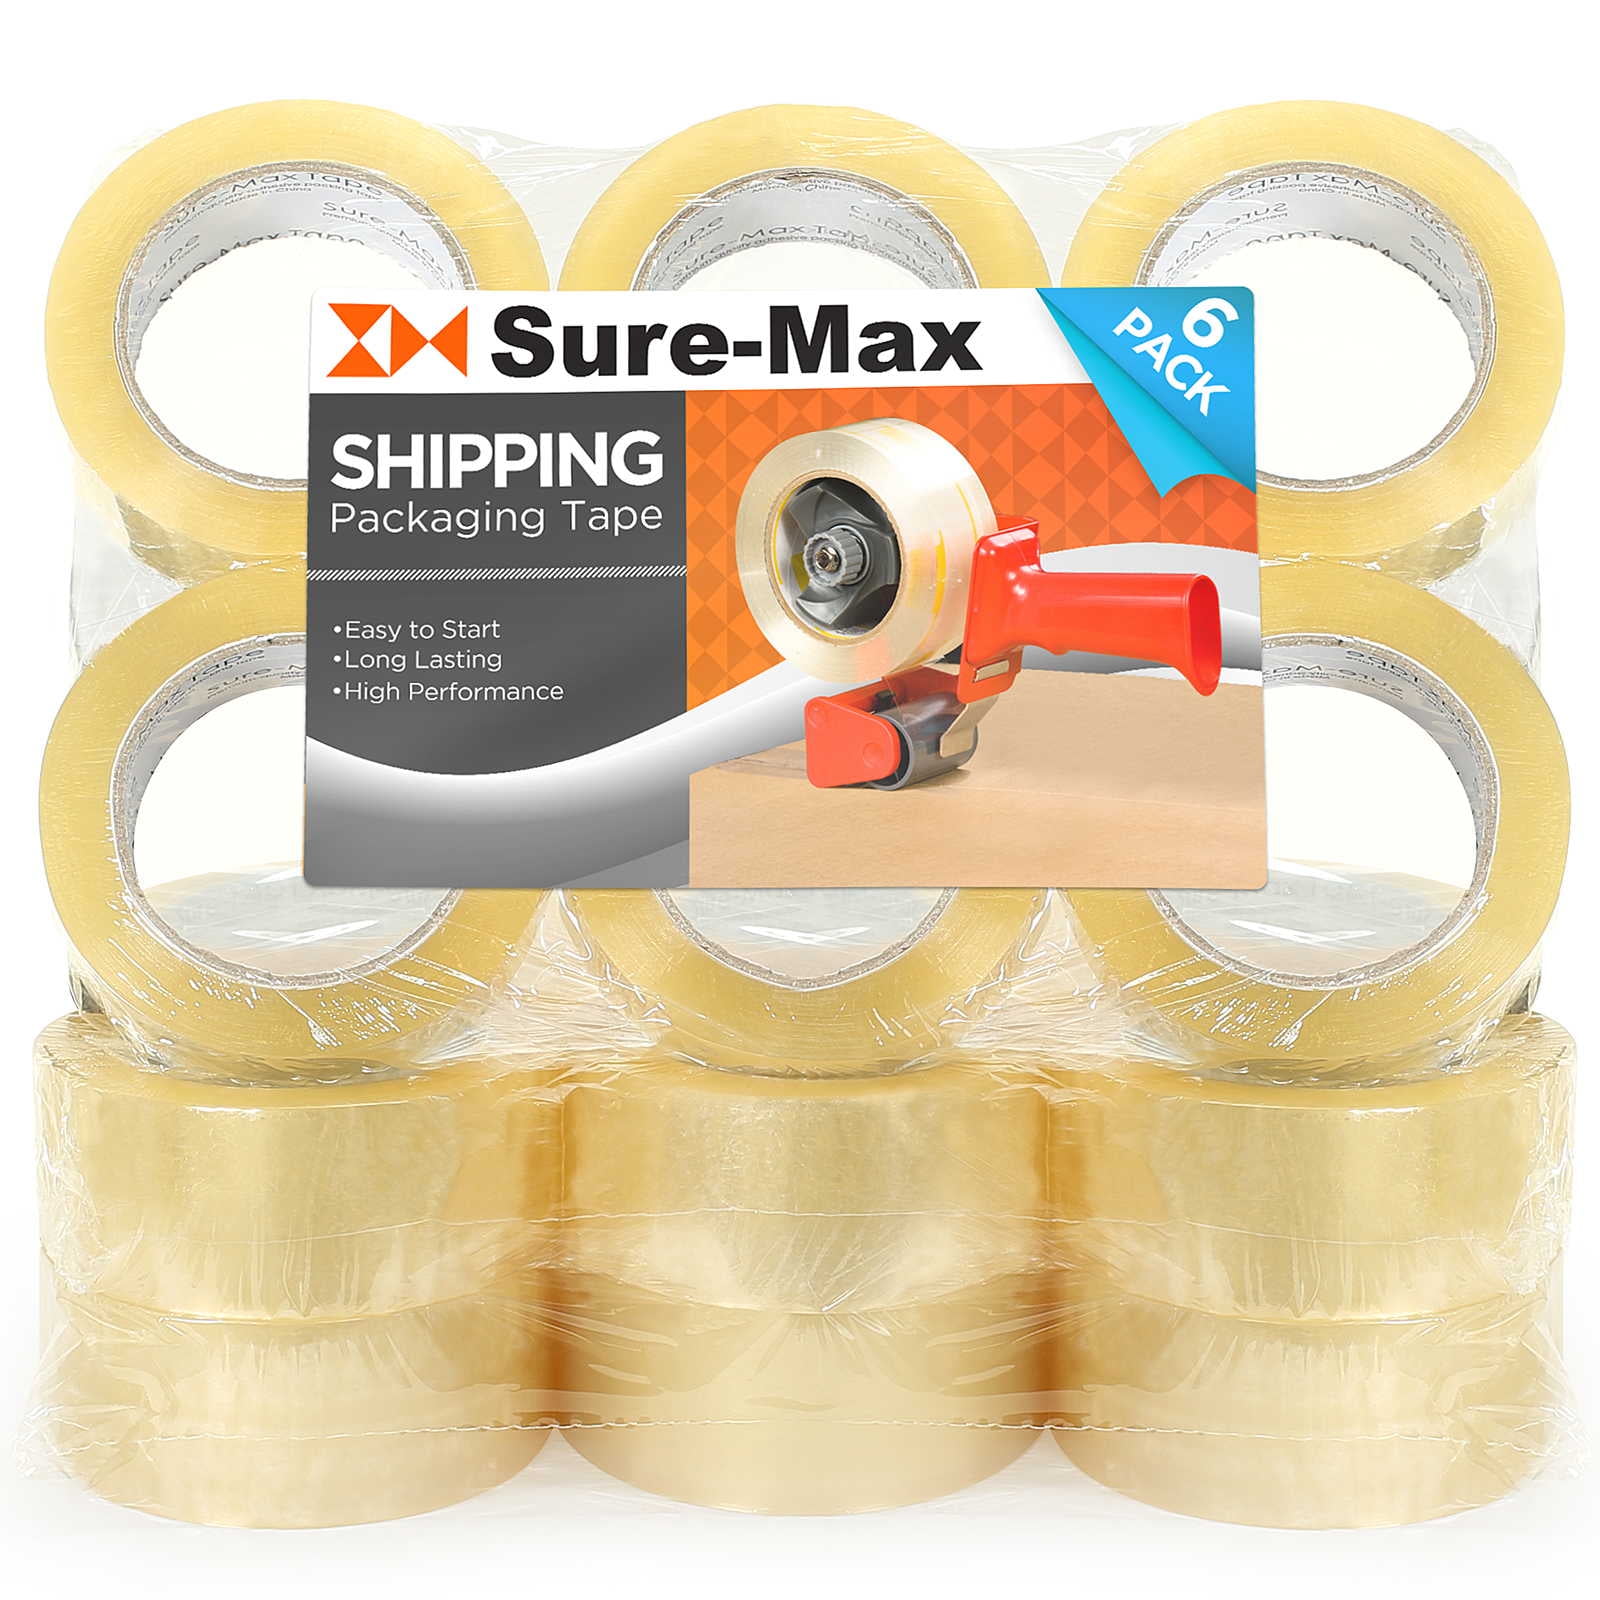 12 Rolls Parcel Tape Adhesive Roll Pack Tape Pack Film Clear 66m 0,01 €/M 